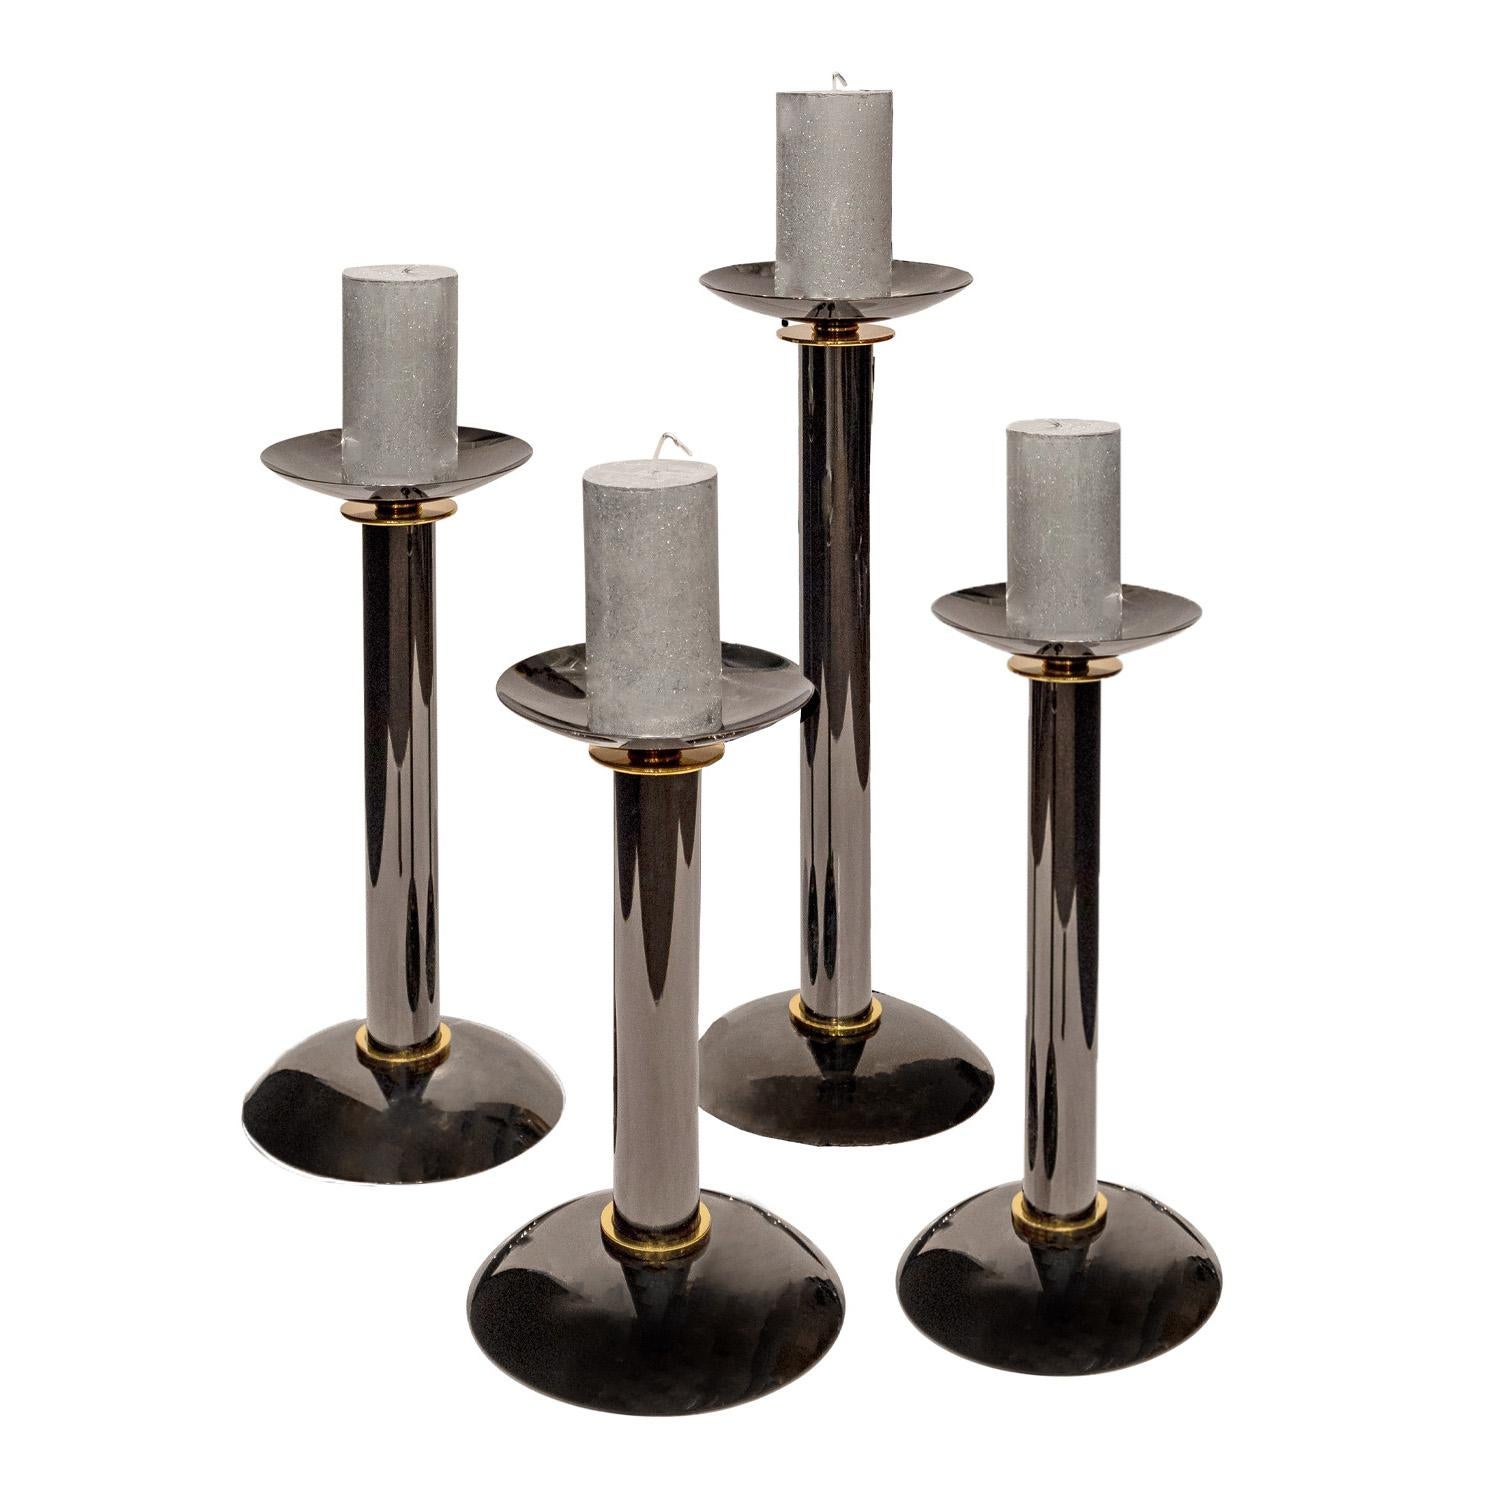 Set of 4 candle holders in polished gunmetal with brass accents by Karl Springer, American 1980s. These iconic Springer candle holders are the epitome of chic.

Reference 
Karl Springer Red Binder Catalog, published in the 1980’s, Section